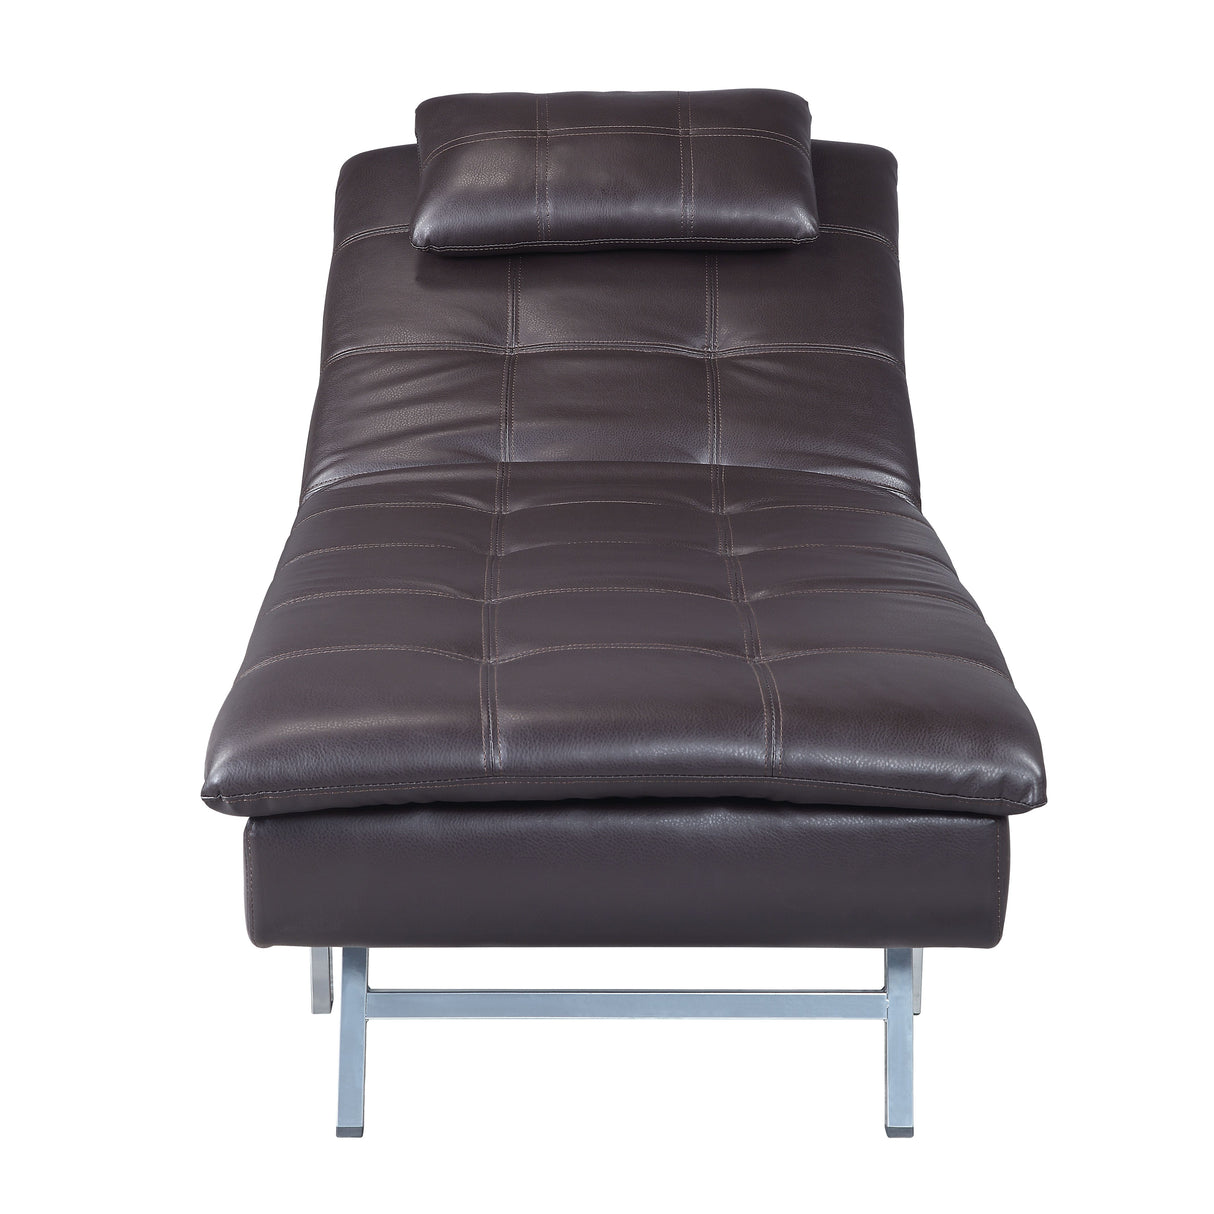 Padilla Brown Synthetic Leather Chaise